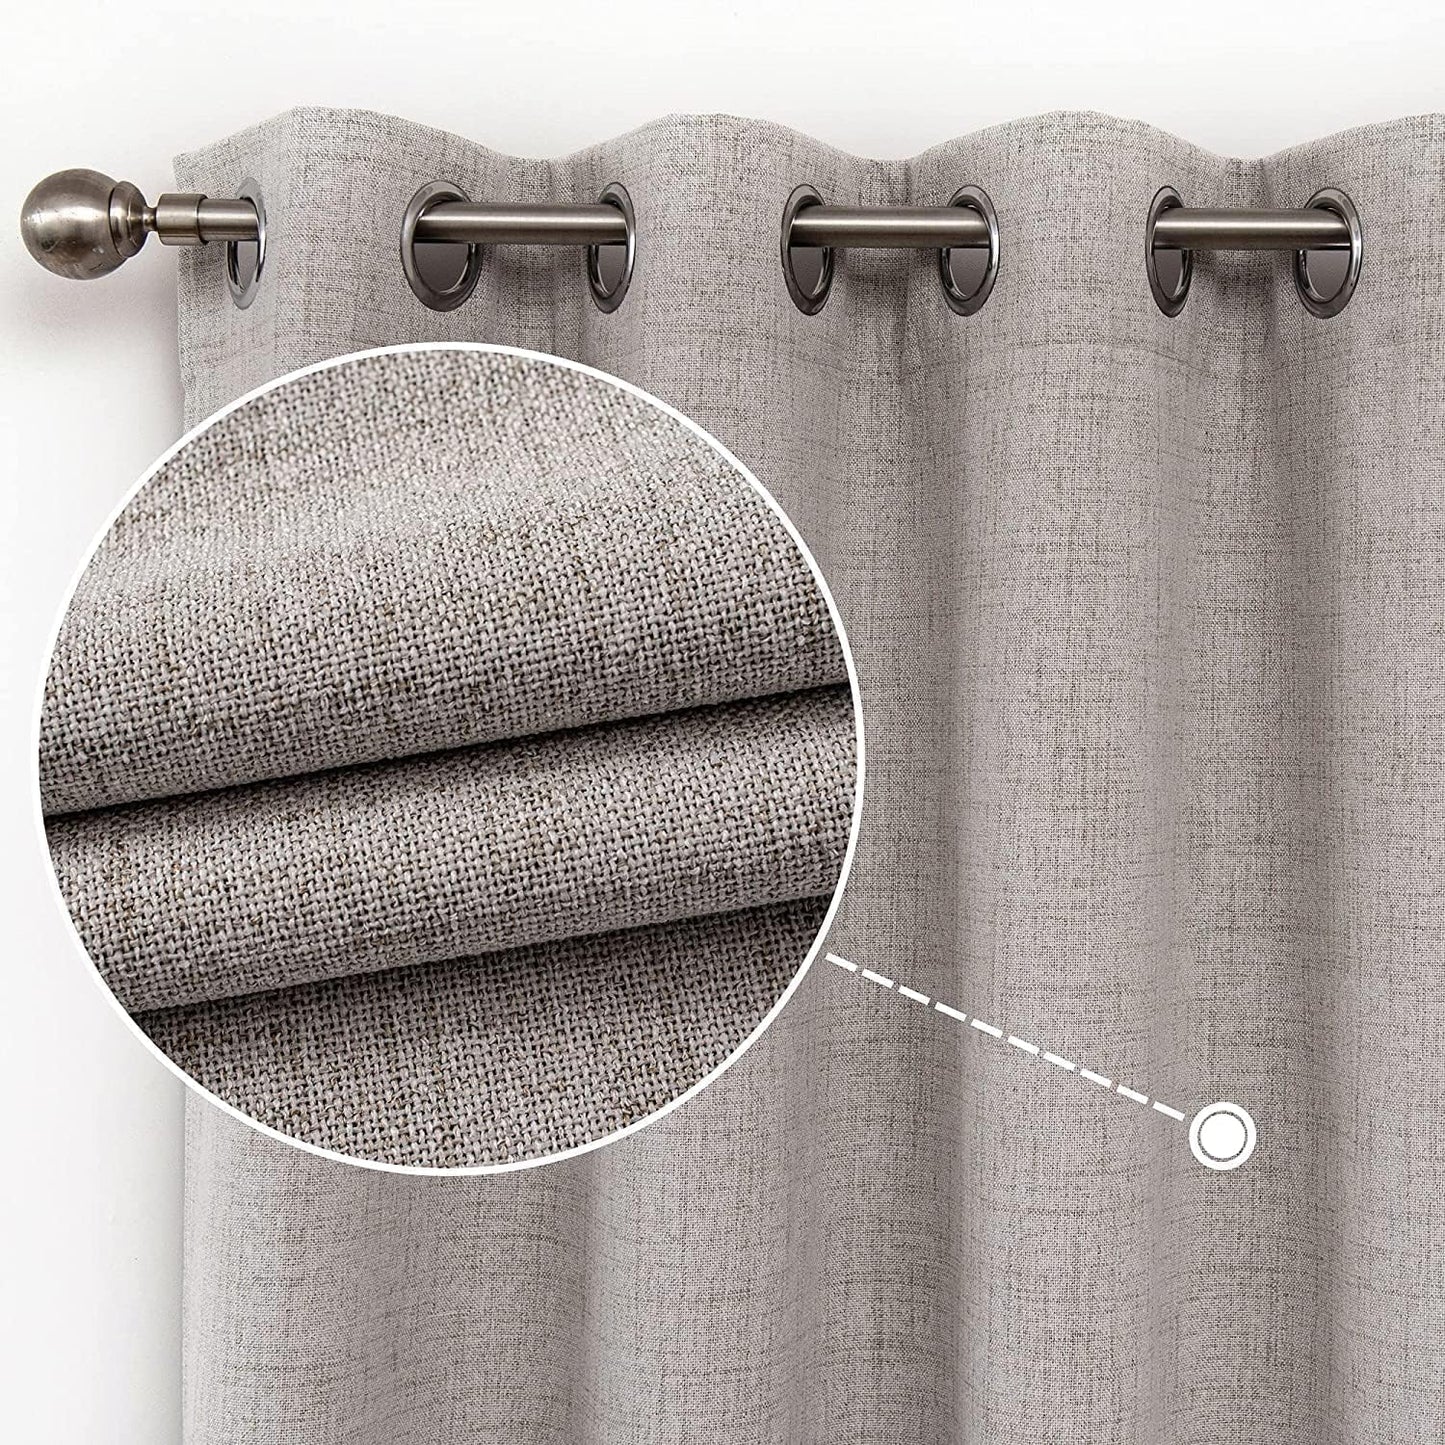 CUCRAF Full Blackout Window Curtains 84 Inches Long,Faux Linen Look Thermal Insulated Grommet Drapes Panels for Bedroom Living Room,Set of 2(52 X 84 Inches, Light Khaki)  CUCRAF Off White 52 X 90 Inches 